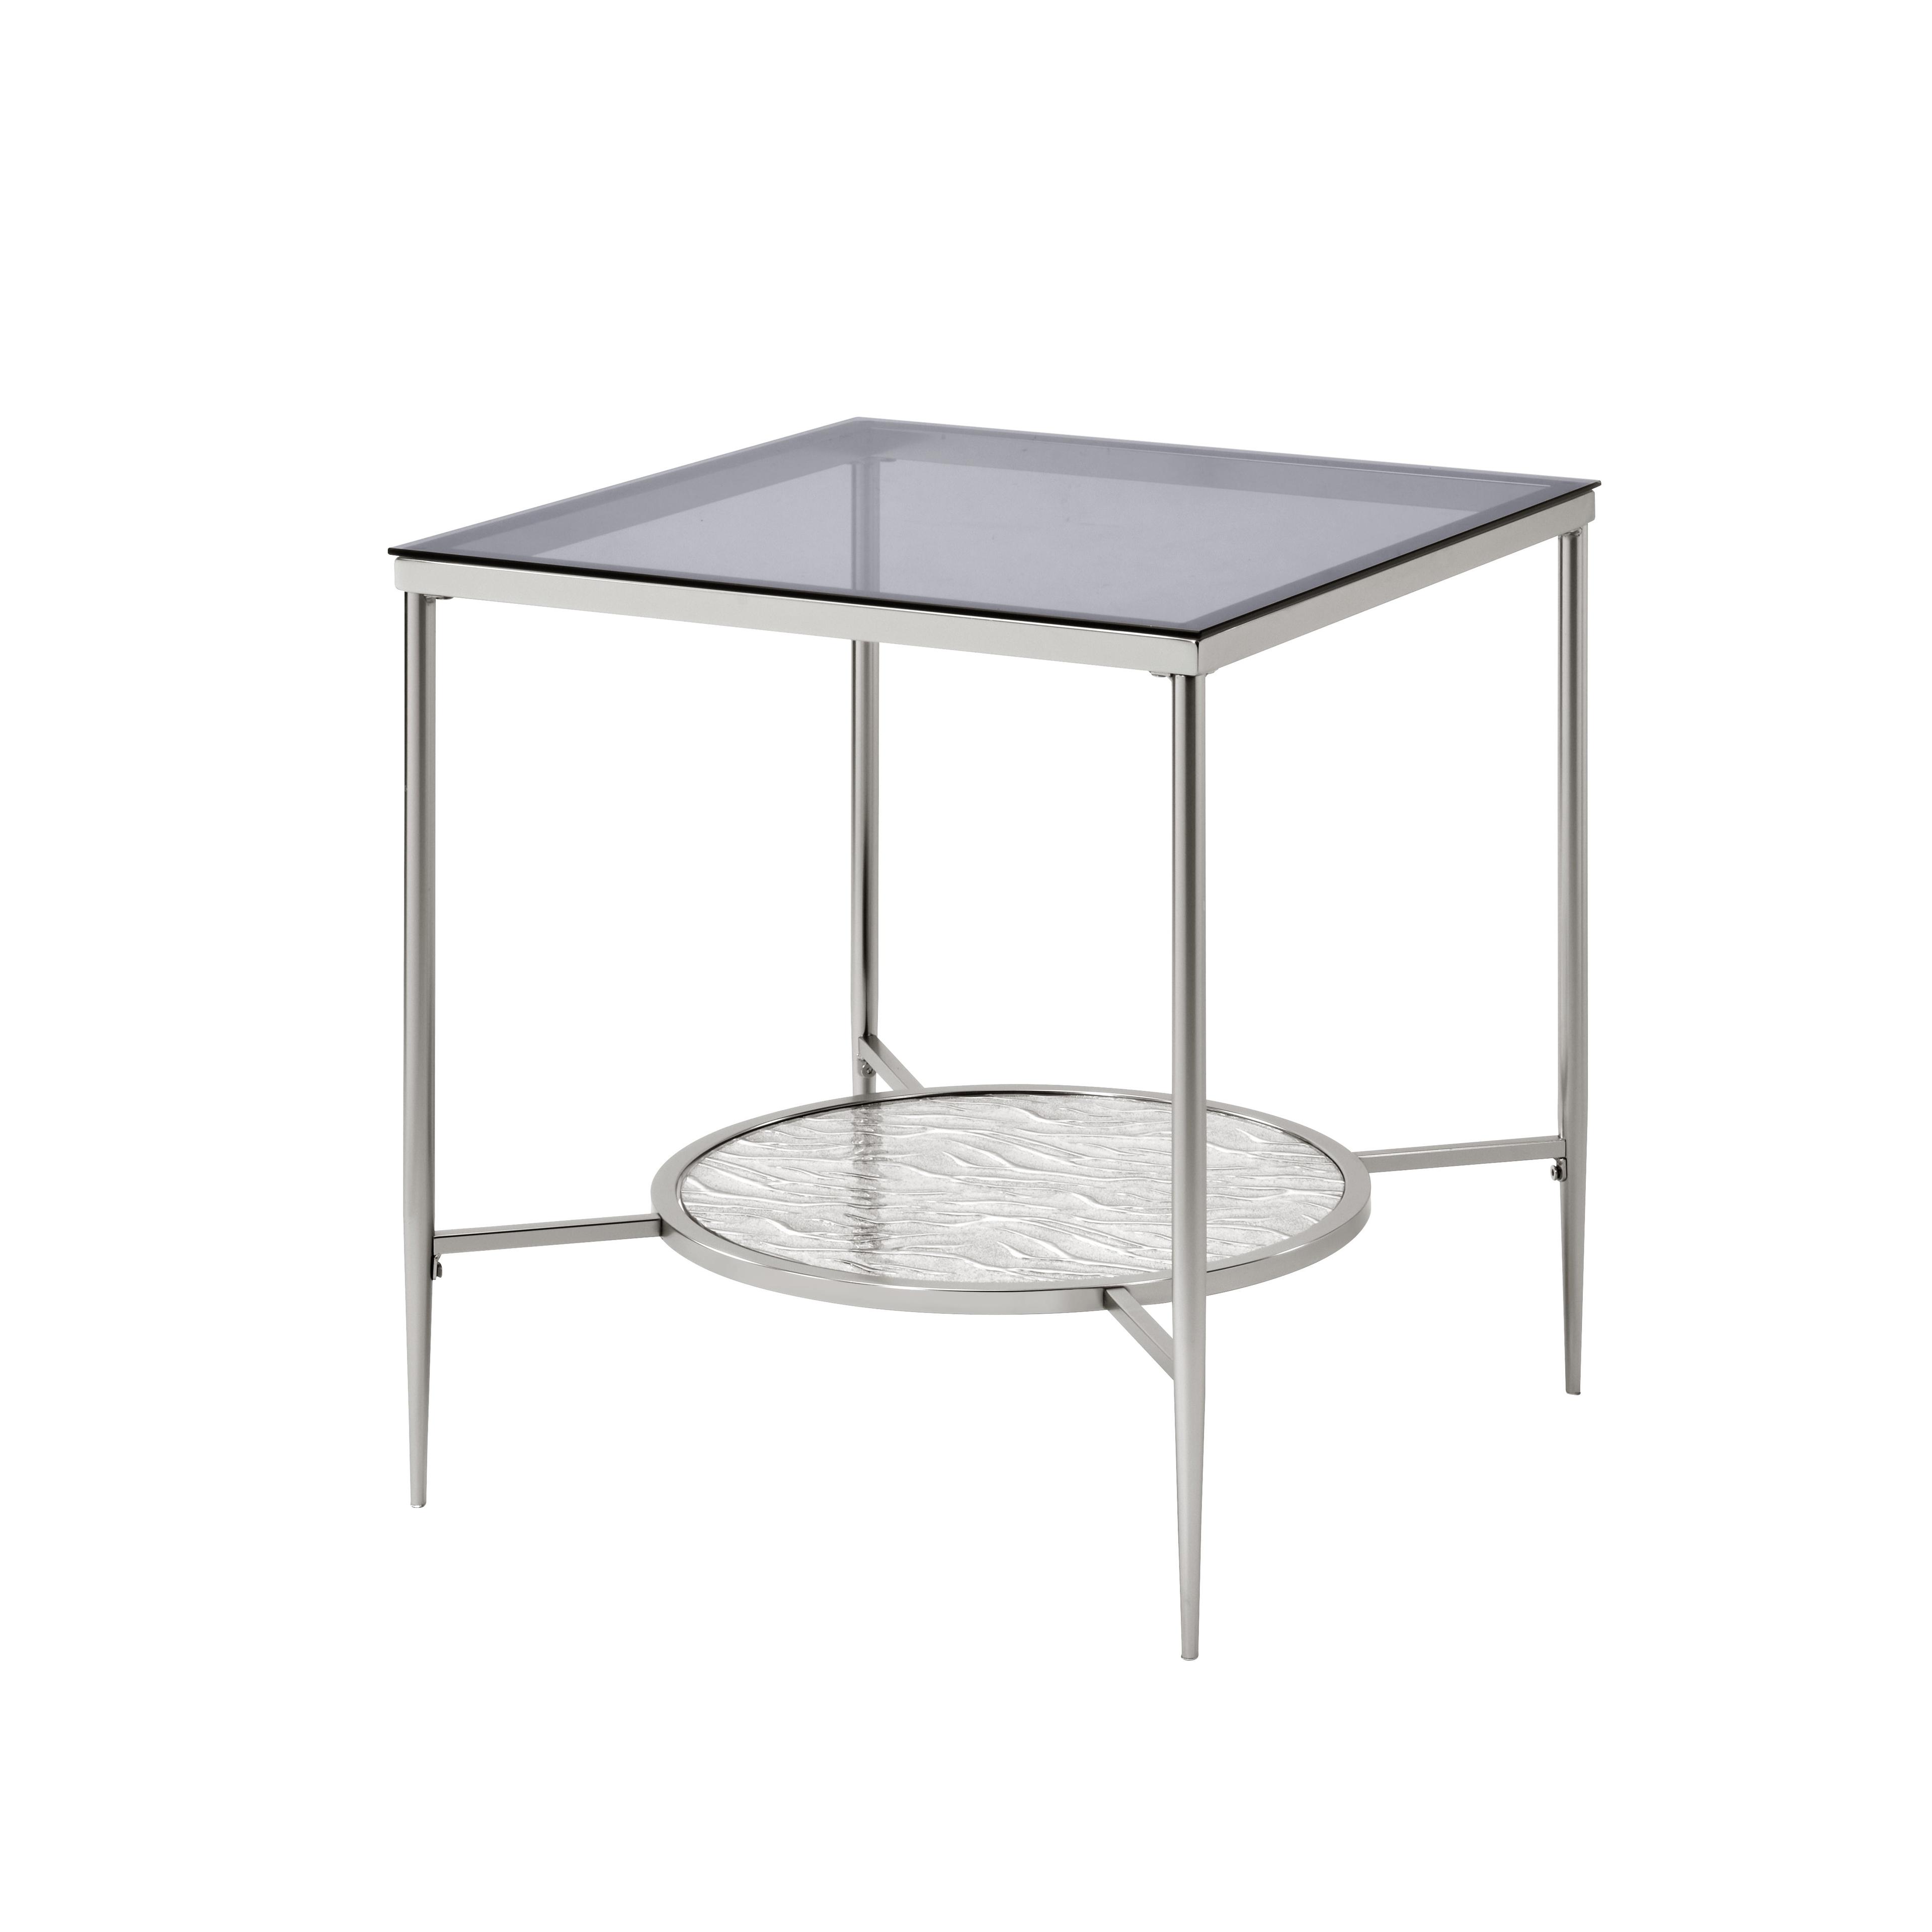 Adelrik 21'' Chrome Finish Square Mirrored End Table